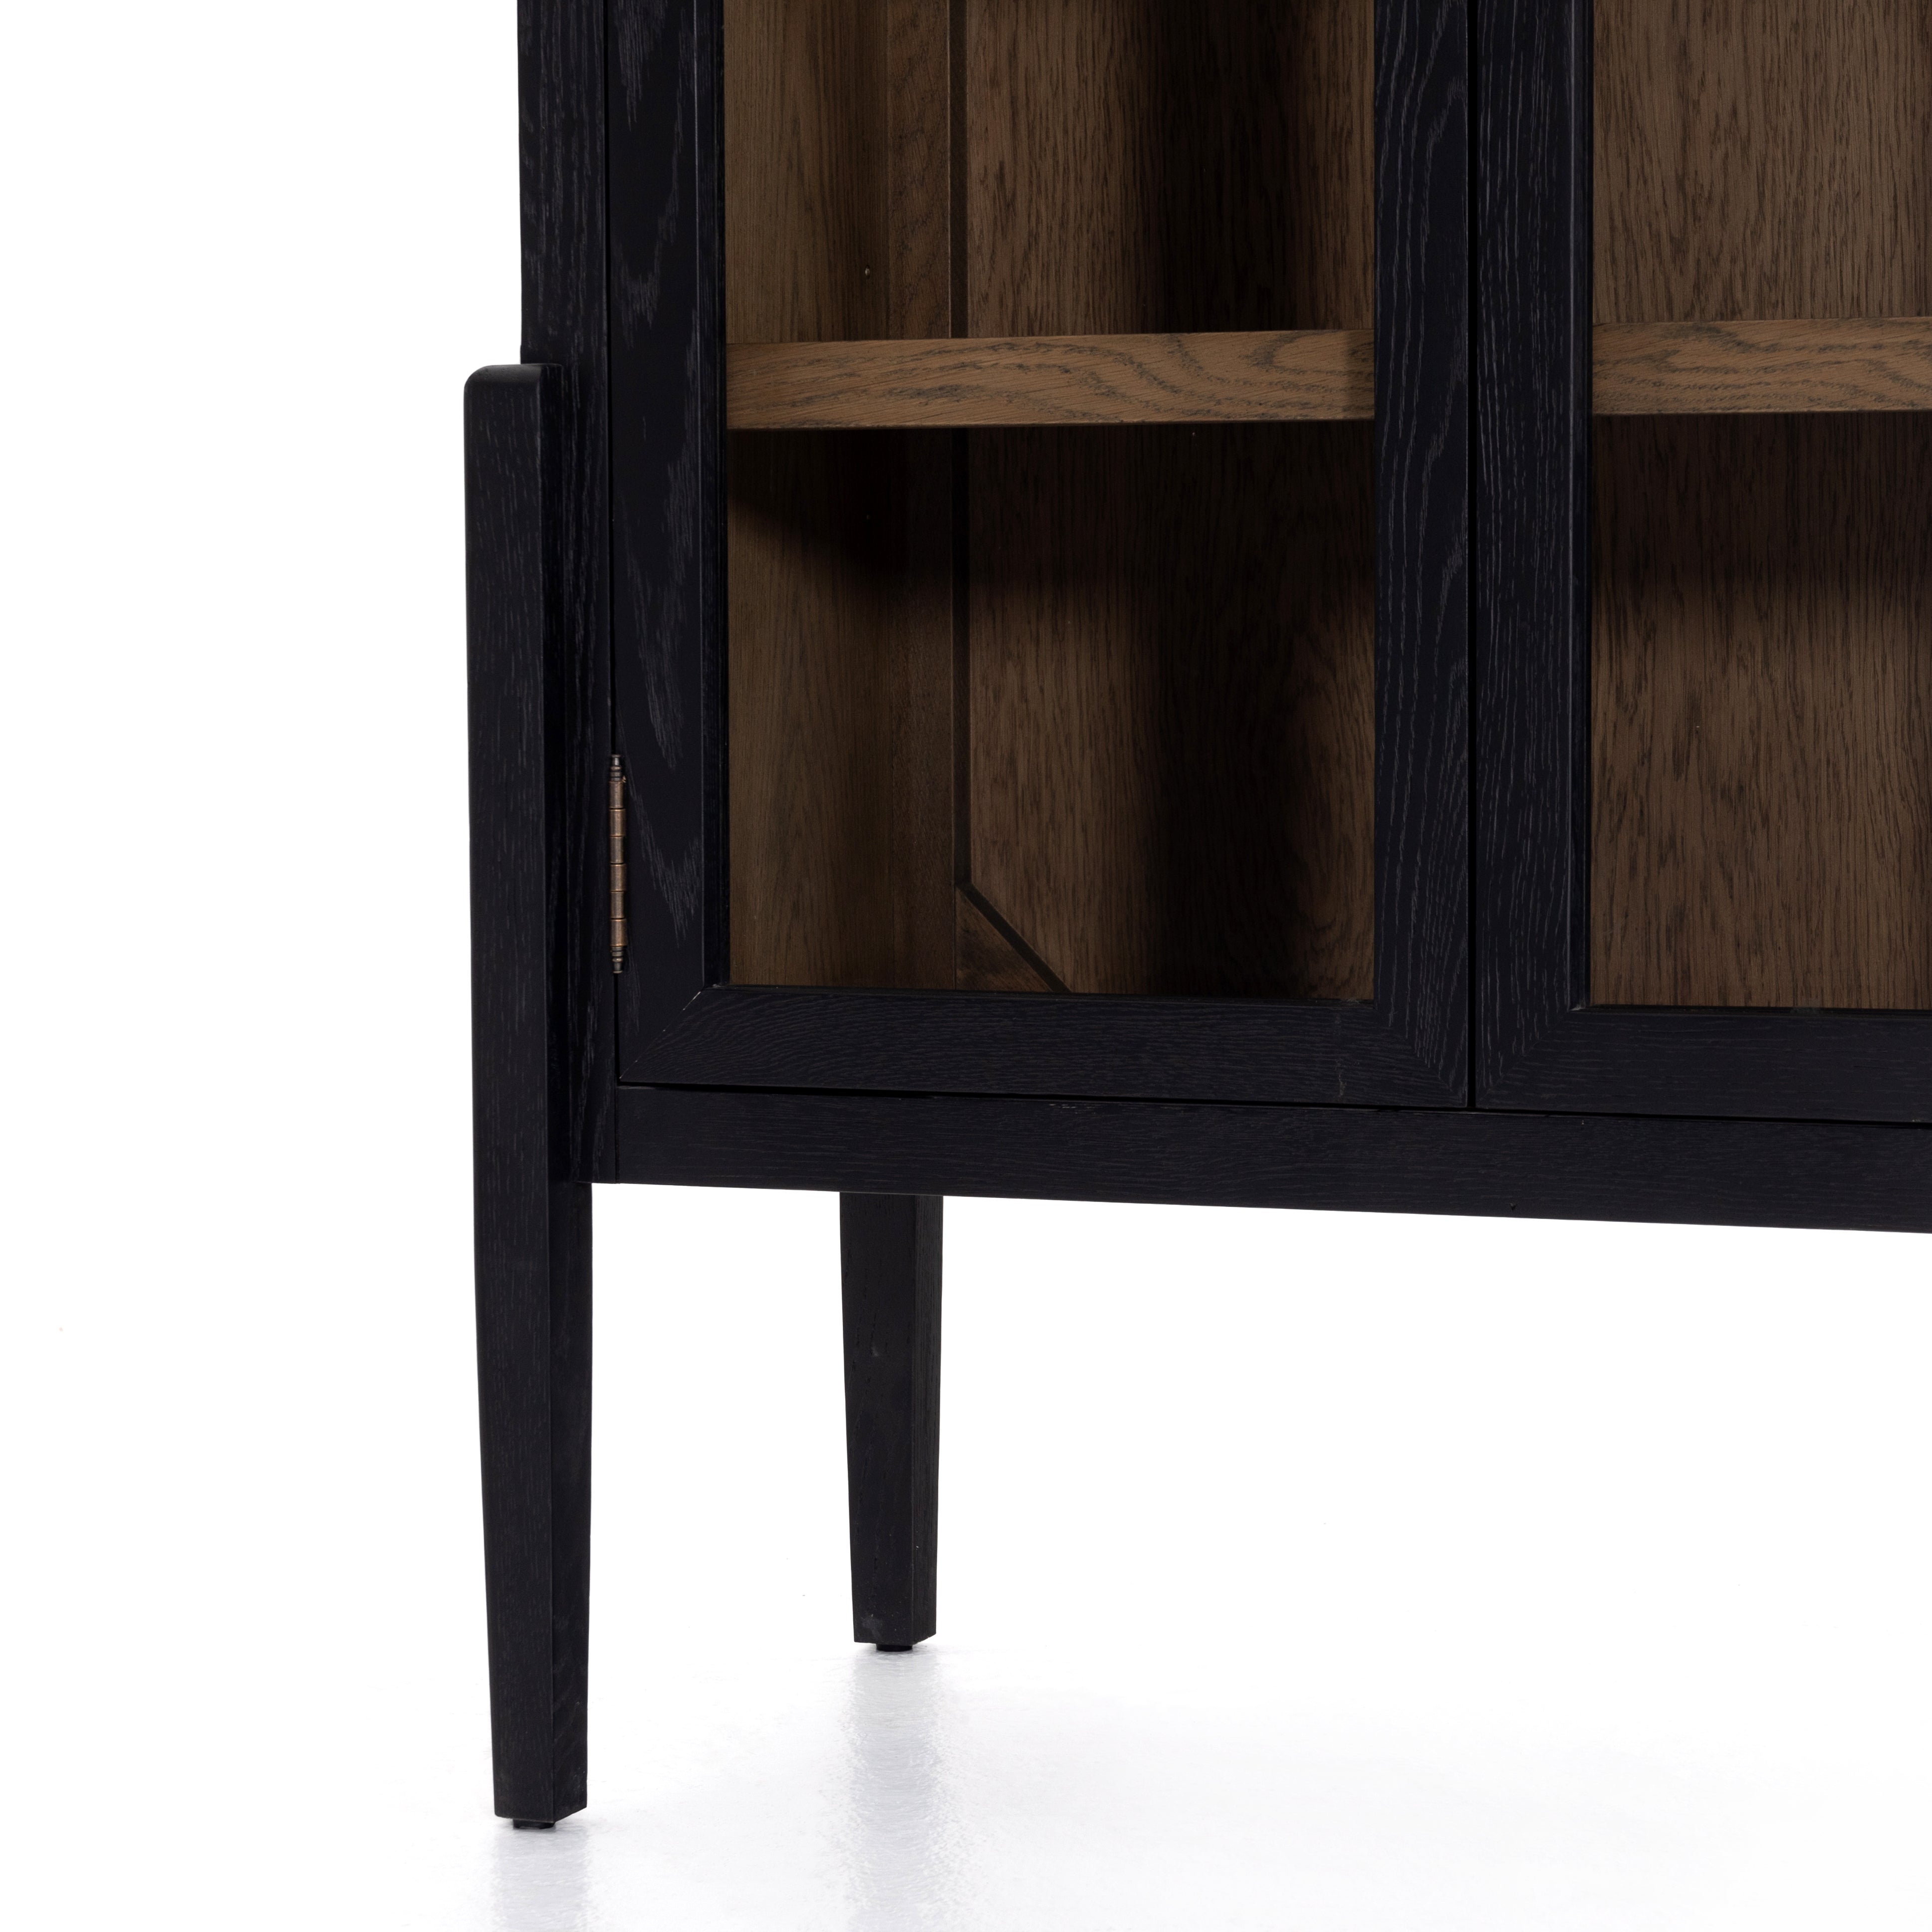 Store it in style with this Tolle Cabinet - Drifted Oak. Beautifully shaped cabinetry of black solid oak features spacious interior shelving and clear glass front, ready for displaying favorite books, photos and treasures in any room!  Overall Dimensions: 38.00"w x 19.00"d x 84.00"h